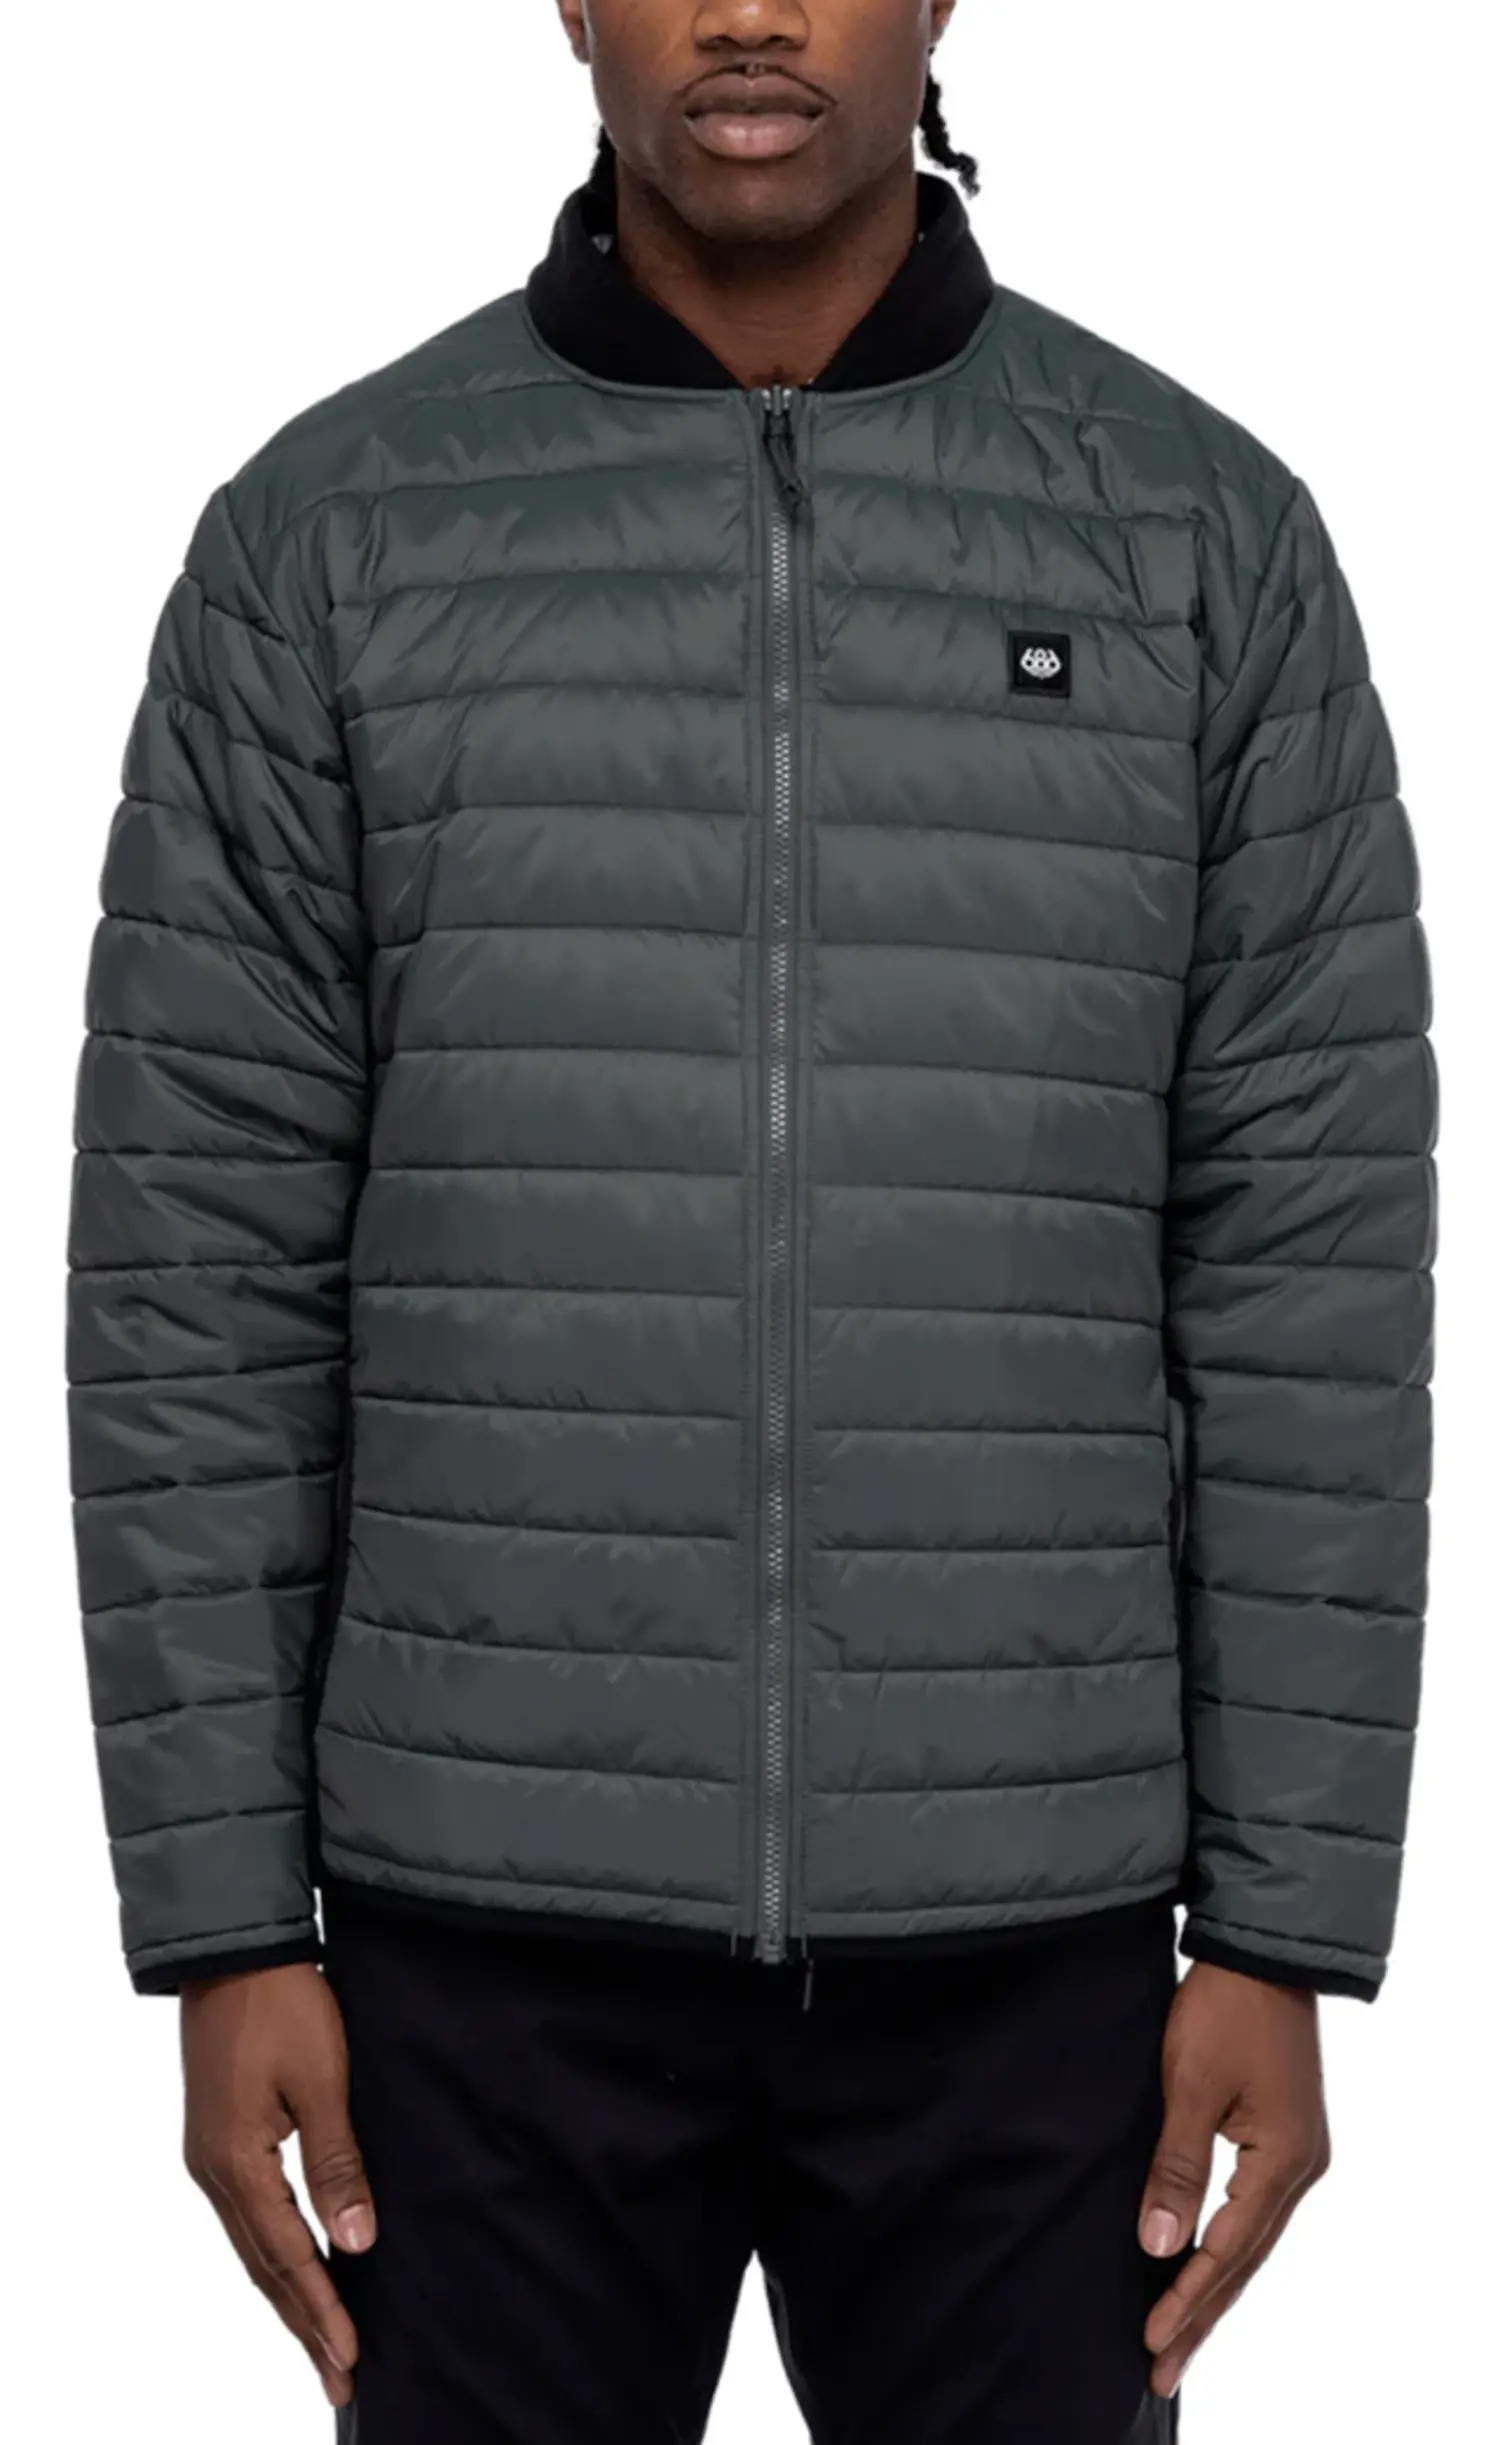 686 Technical Apparel Geo Insulated Jacket 8-20y - Clement